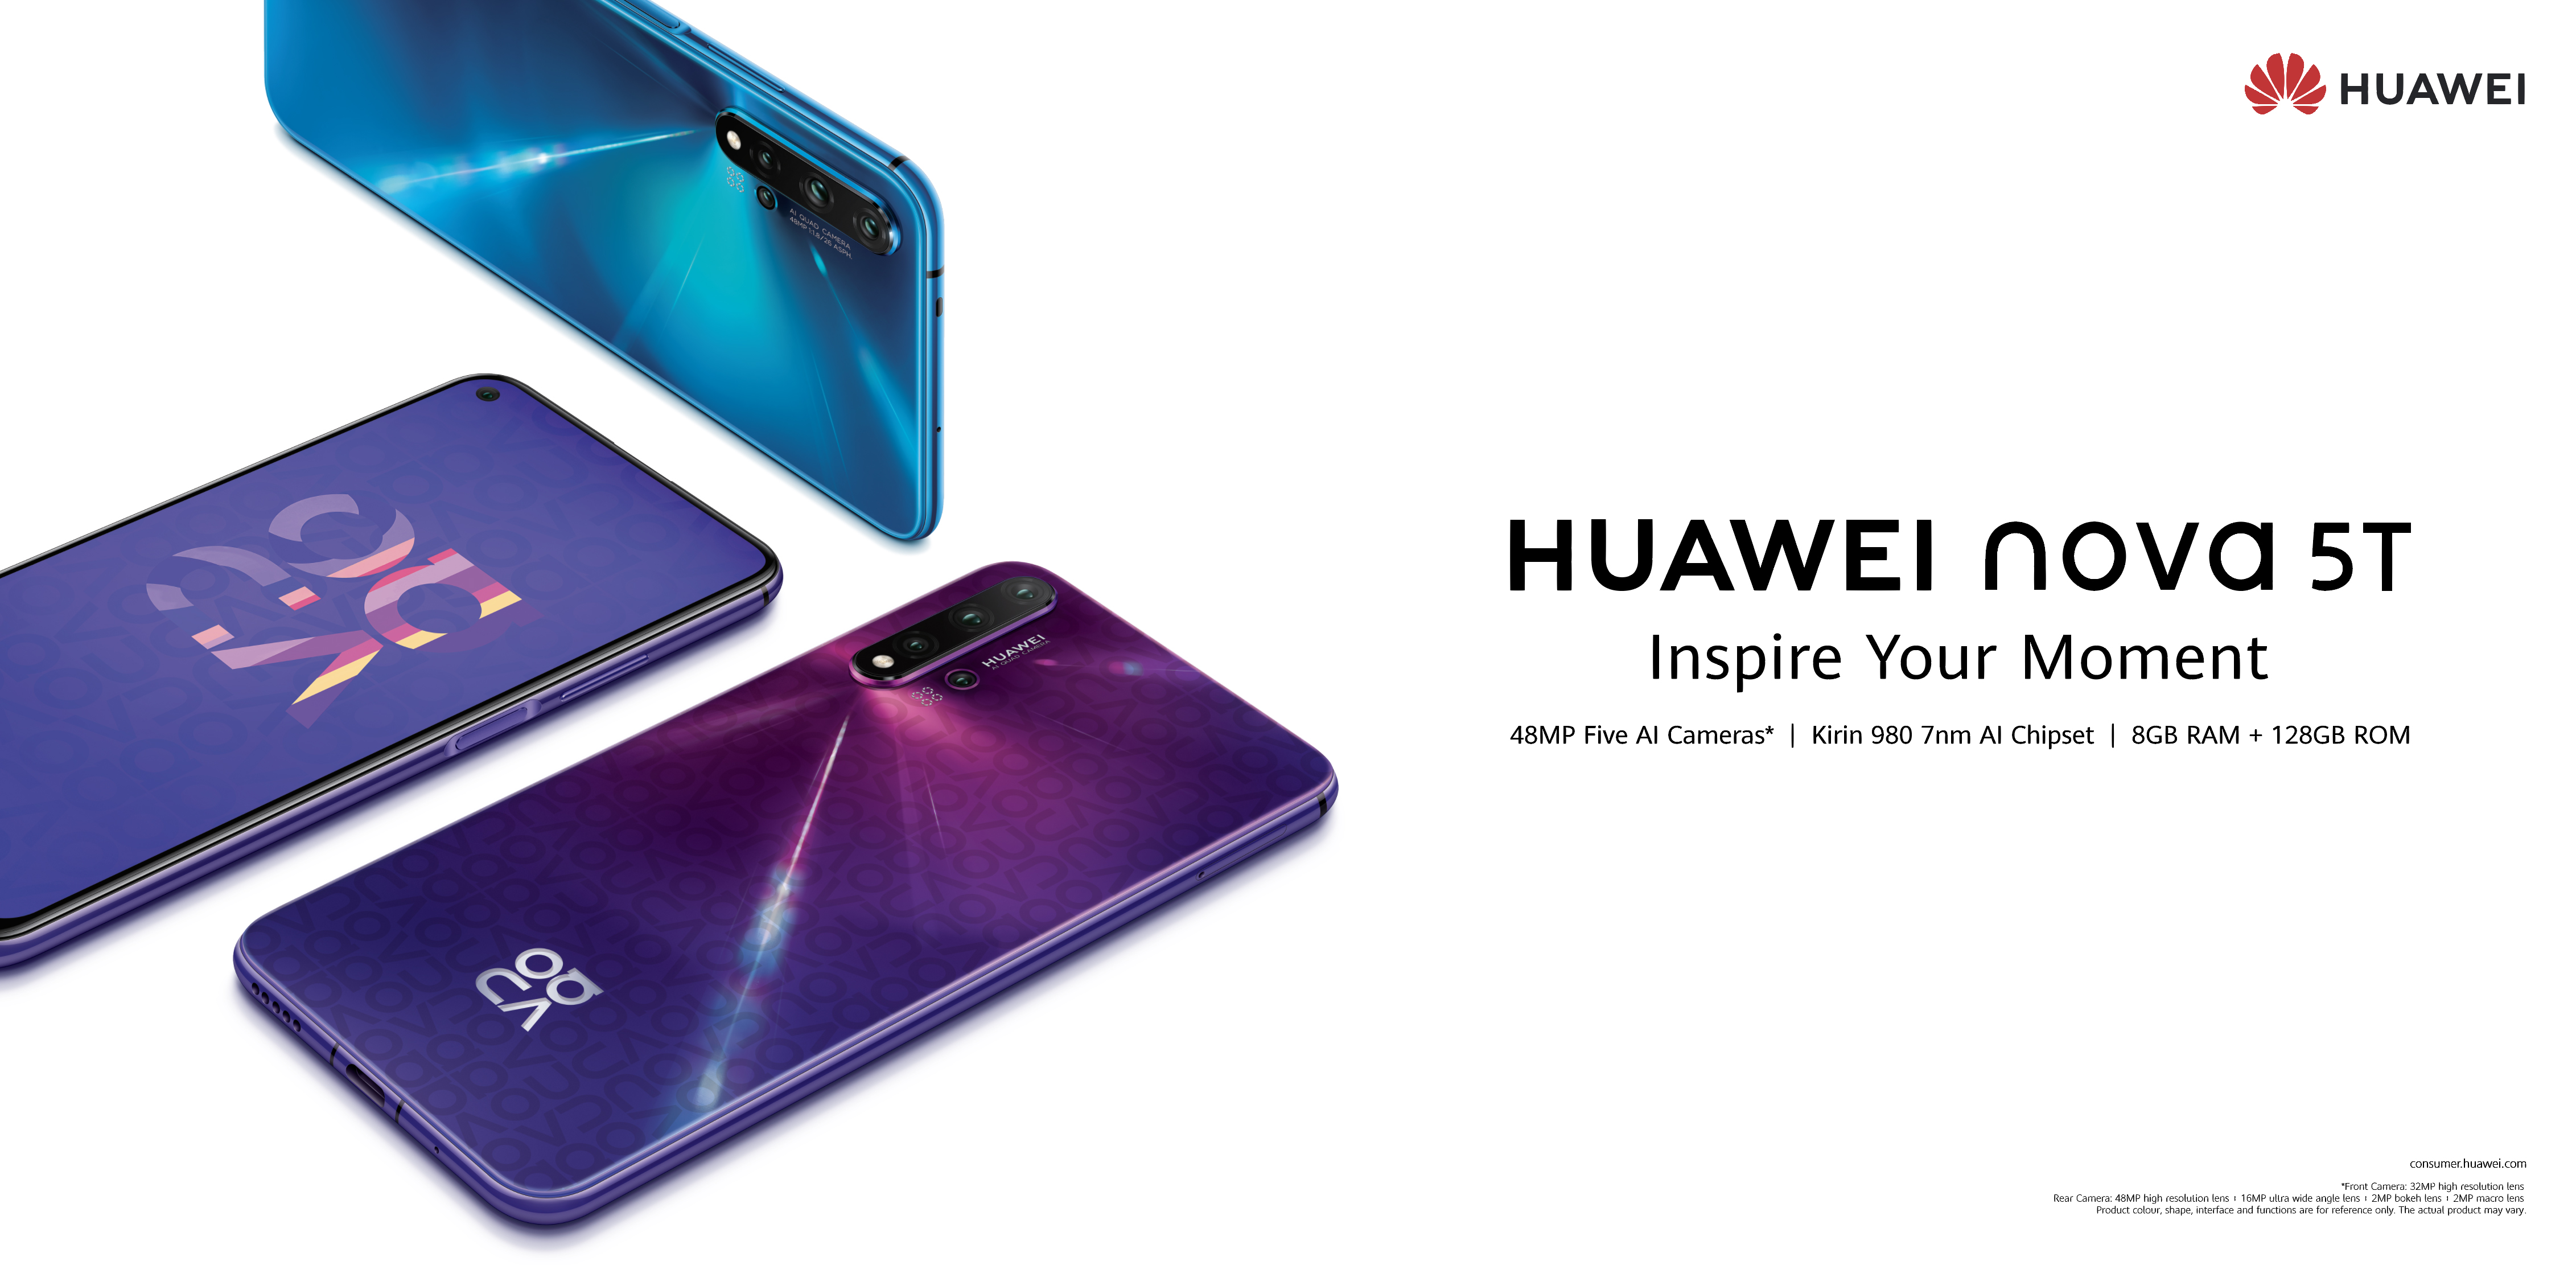 HUAWEI nova 5T is here - the ultimate smartphone for multi-scenario photography and gaming with long battery life - Alvinology